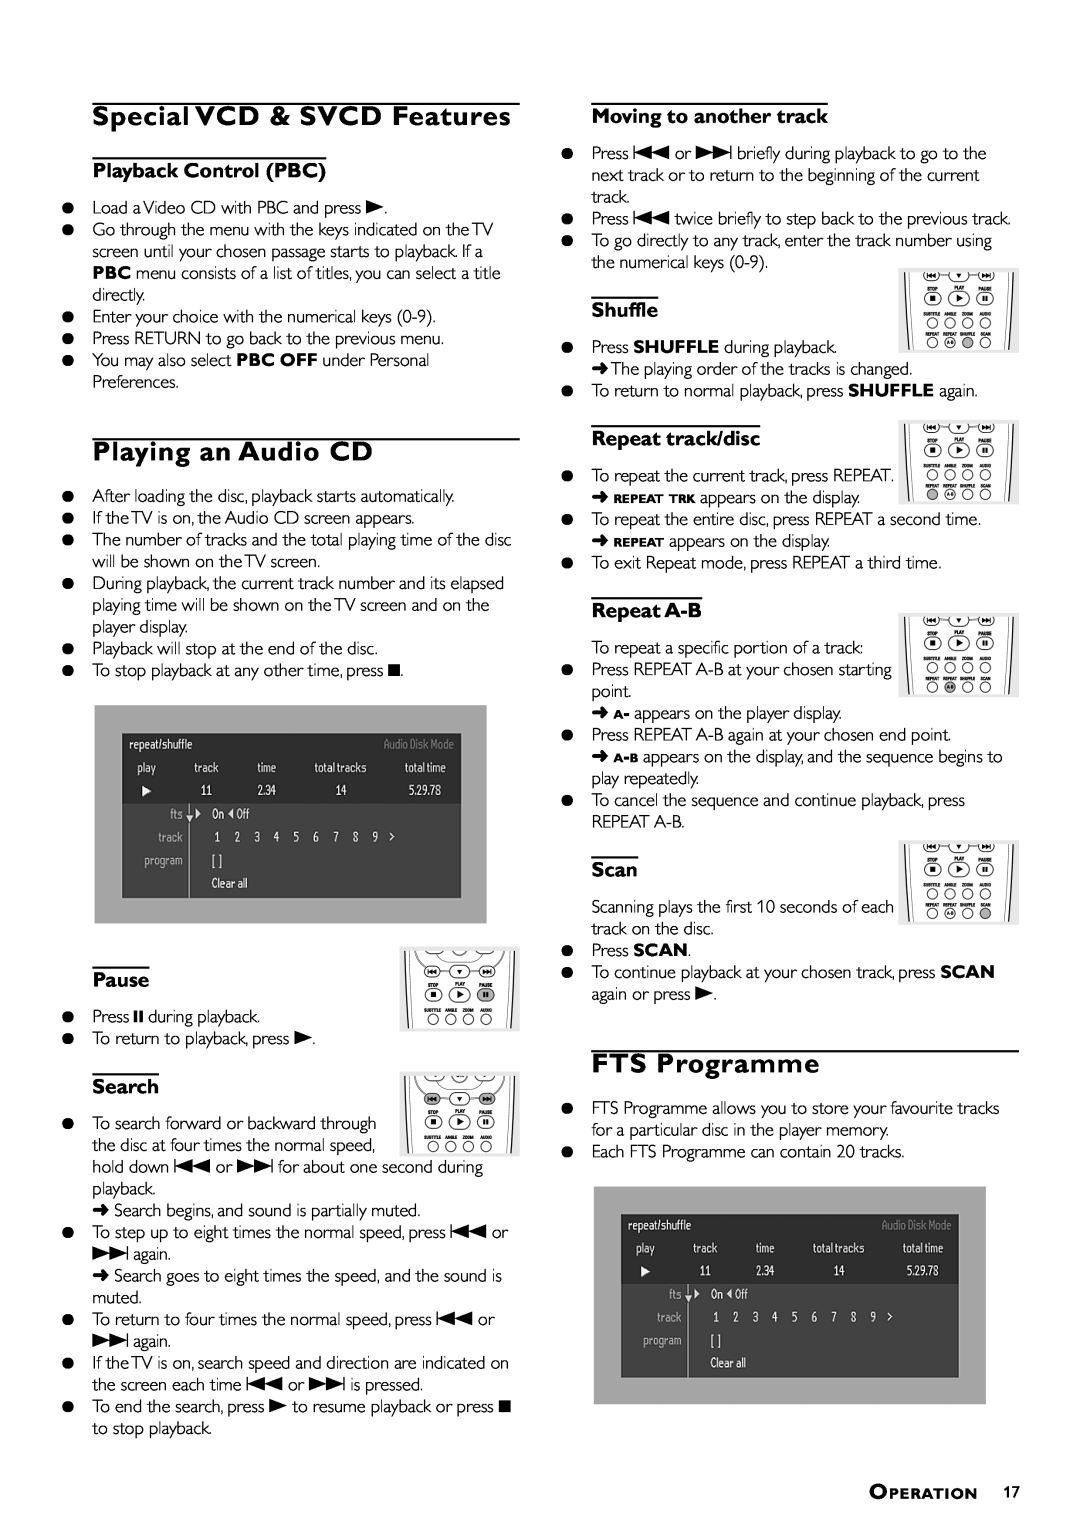 Philips DVD-762 Special VCD & SVCD Features, Playing an Audio CD, FTS Programme, Playback Control PBC, Pause, Shuffle 